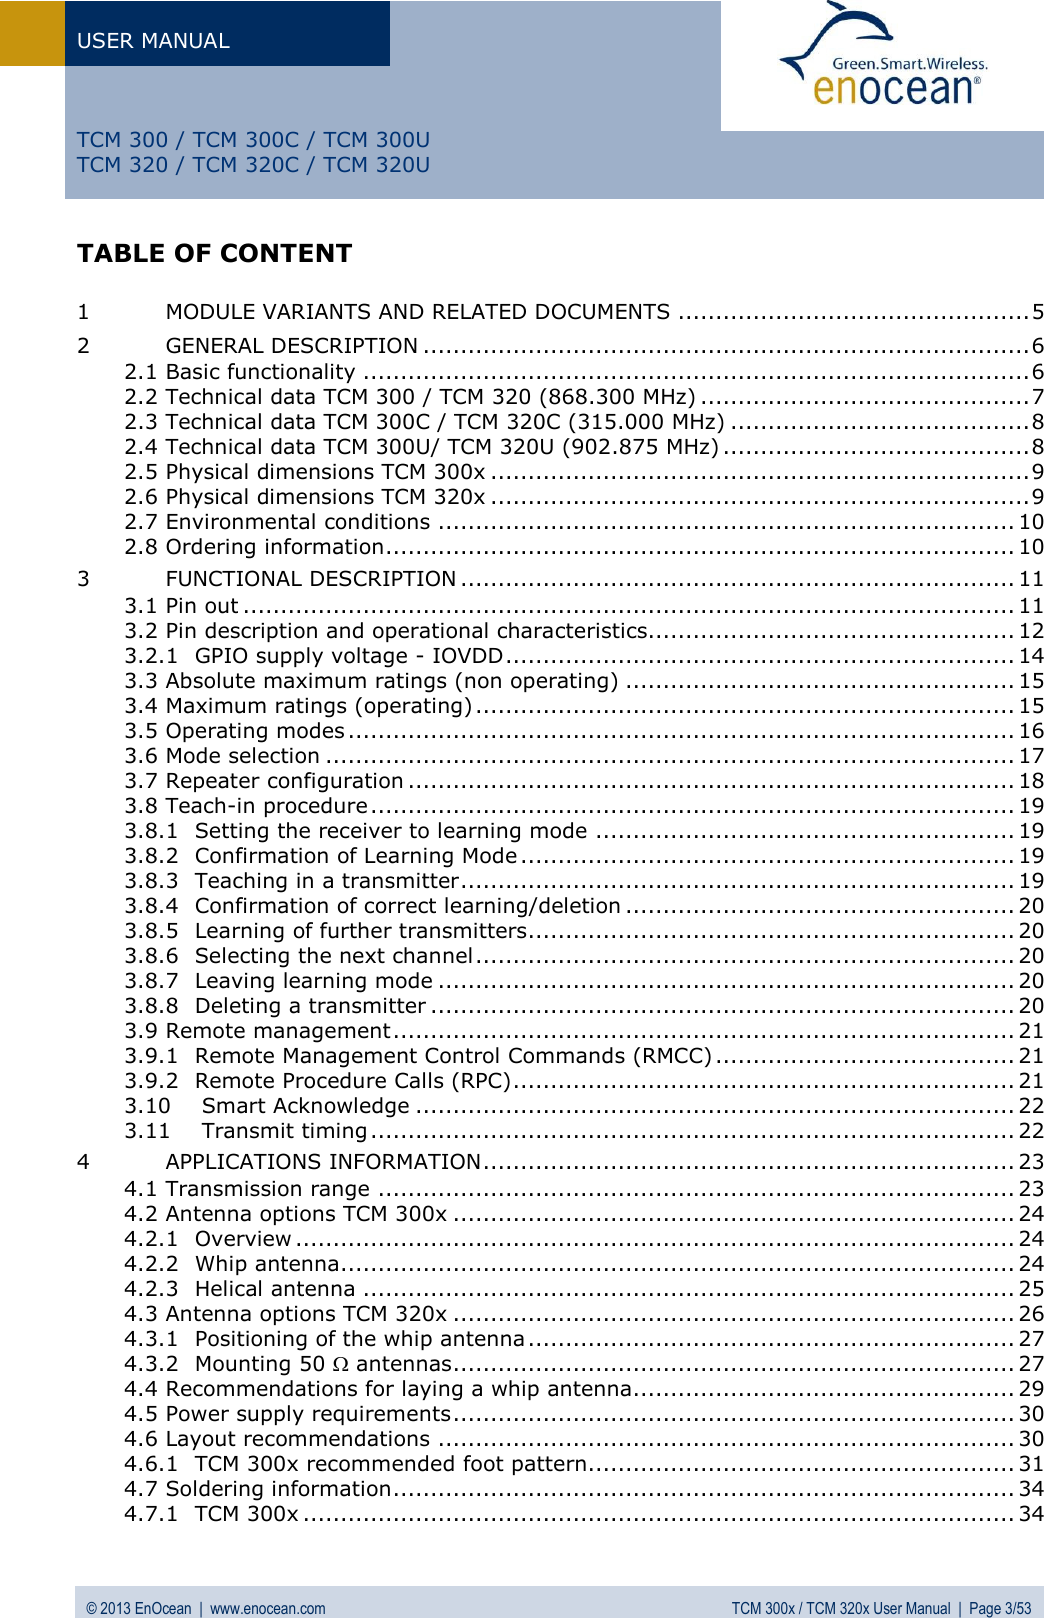 USER MANUAL   © 2013 EnOcean  |  www.enocean.com  TCM 300x / TCM 320x User Manual  |  Page 3/53   TCM 300 / TCM 300C / TCM 300U TCM 320 / TCM 320C / TCM 320U TABLE OF CONTENT  1 MODULE VARIANTS AND RELATED DOCUMENTS ............................................... 5 2 GENERAL DESCRIPTION ................................................................................. 6 2.1 Basic functionality ......................................................................................... 6 2.2 Technical data TCM 300 / TCM 320 (868.300 MHz) ............................................ 7 2.3 Technical data TCM 300C / TCM 320C (315.000 MHz) ........................................ 8 2.4 Technical data TCM 300U/ TCM 320U (902.875 MHz) ......................................... 8 2.5 Physical dimensions TCM 300x ........................................................................ 9 2.6 Physical dimensions TCM 320x ........................................................................ 9 2.7 Environmental conditions ............................................................................. 10 2.8 Ordering information .................................................................................... 10 3 FUNCTIONAL DESCRIPTION .......................................................................... 11 3.1 Pin out ....................................................................................................... 11 3.2 Pin description and operational characteristics ................................................. 12 3.2.1 GPIO supply voltage - IOVDD .................................................................... 14 3.3 Absolute maximum ratings (non operating) .................................................... 15 3.4 Maximum ratings (operating) ........................................................................ 15 3.5 Operating modes ......................................................................................... 16 3.6 Mode selection ............................................................................................ 17 3.7 Repeater configuration ................................................................................. 18 3.8 Teach-in procedure ...................................................................................... 19 3.8.1 Setting the receiver to learning mode ........................................................ 19 3.8.2 Confirmation of Learning Mode .................................................................. 19 3.8.3 Teaching in a transmitter .......................................................................... 19 3.8.4 Confirmation of correct learning/deletion .................................................... 20 3.8.5 Learning of further transmitters................................................................. 20 3.8.6 Selecting the next channel ........................................................................ 20 3.8.7 Leaving learning mode ............................................................................. 20 3.8.8 Deleting a transmitter .............................................................................. 20 3.9 Remote management ................................................................................... 21 3.9.1 Remote Management Control Commands (RMCC) ........................................ 21 3.9.2 Remote Procedure Calls (RPC) ................................................................... 21 3.10 Smart Acknowledge ................................................................................ 22 3.11 Transmit timing ...................................................................................... 22 4 APPLICATIONS INFORMATION ....................................................................... 23 4.1 Transmission range ..................................................................................... 23 4.2 Antenna options TCM 300x ........................................................................... 24 4.2.1 Overview ................................................................................................ 24 4.2.2 Whip antenna .......................................................................................... 24 4.2.3 Helical antenna ....................................................................................... 25 4.3 Antenna options TCM 320x ........................................................................... 26 4.3.1 Positioning of the whip antenna ................................................................. 27 4.3.2 Mounting 50  antennas ........................................................................... 27 4.4 Recommendations for laying a whip antenna................................................... 29 4.5 Power supply requirements ........................................................................... 30 4.6 Layout recommendations ............................................................................. 30 4.6.1 TCM 300x recommended foot pattern......................................................... 31 4.7 Soldering information ................................................................................... 34 4.7.1 TCM 300x ............................................................................................... 34 